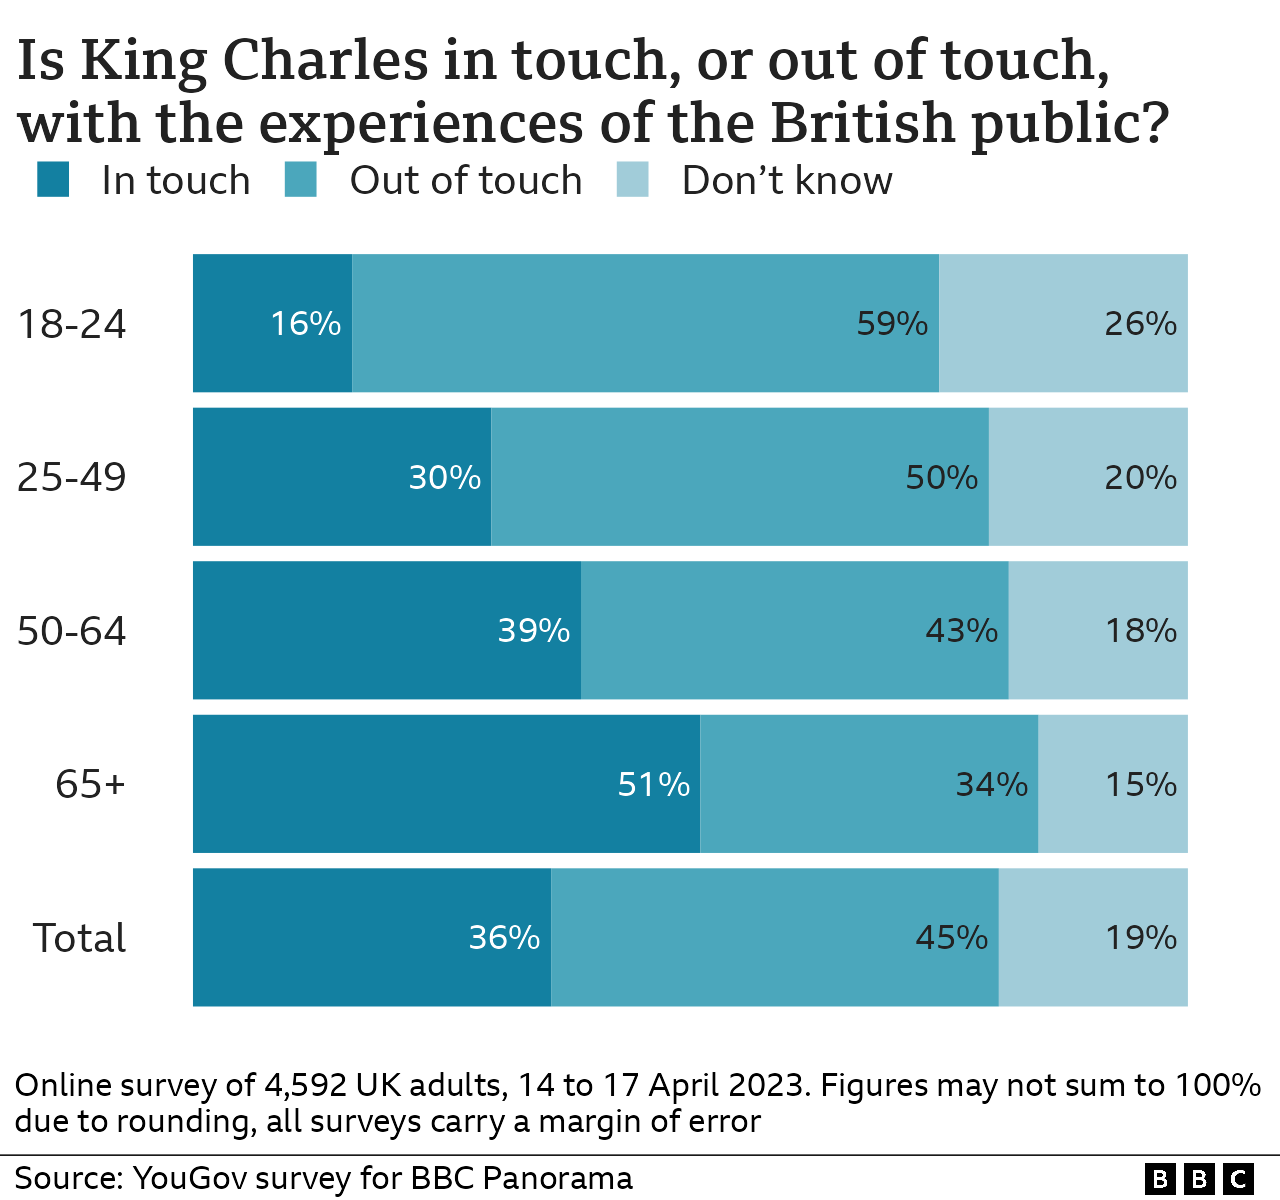 Graphic showing results from Panorama's YouGov poll asking the question: Is King Charles in touch or out of touch with the experiences of the British public? (18-24 year olds - 16% in touch, 59% out of touch; 25-49 year olds - 30% in touch, 50% out of touch; 50-64 year olds - 39% in touch, 43% out of touch; 65+ - 51% in touch, 34% out of touch; all ages together - 35% in touch, 45% out of touch.)